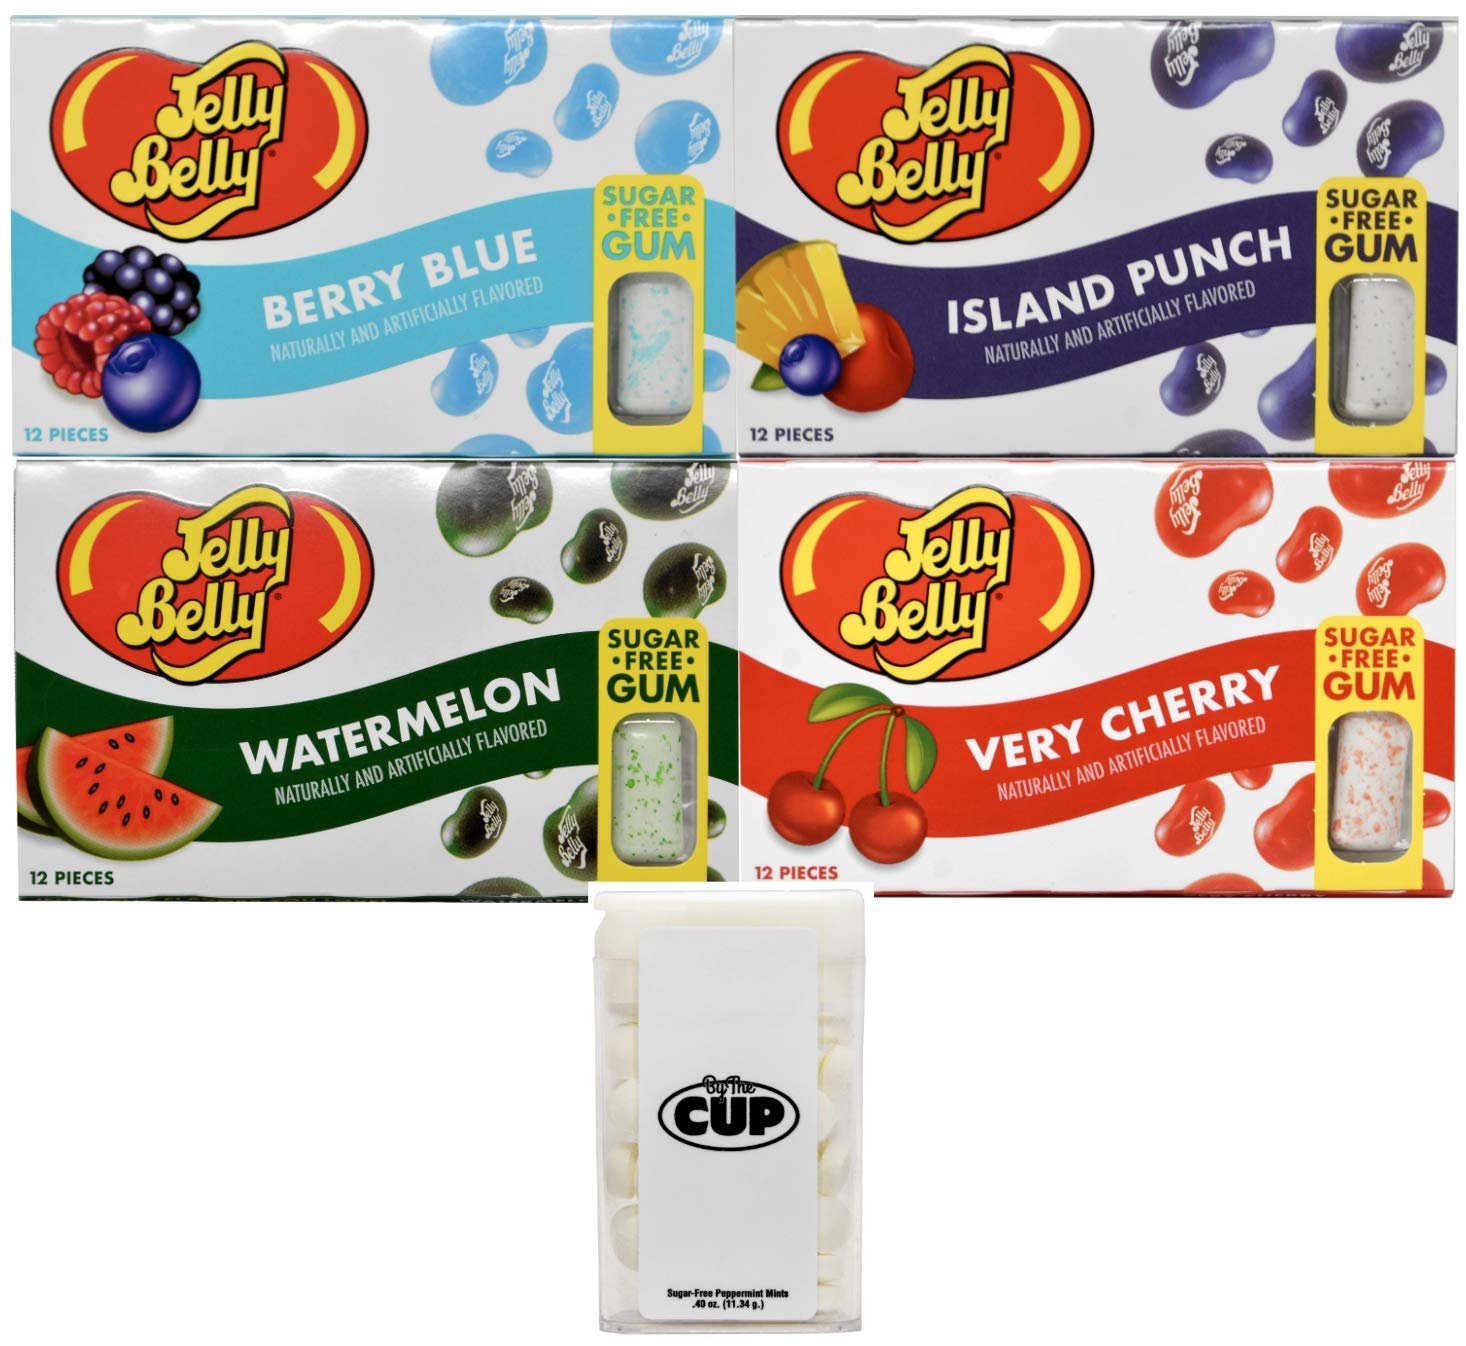 Jelly Belly Sugar Free Gum Variety: Very Cherry, Berry Blue, Island Punch, Watermelon (Pack of 4) with By The Cup Mints